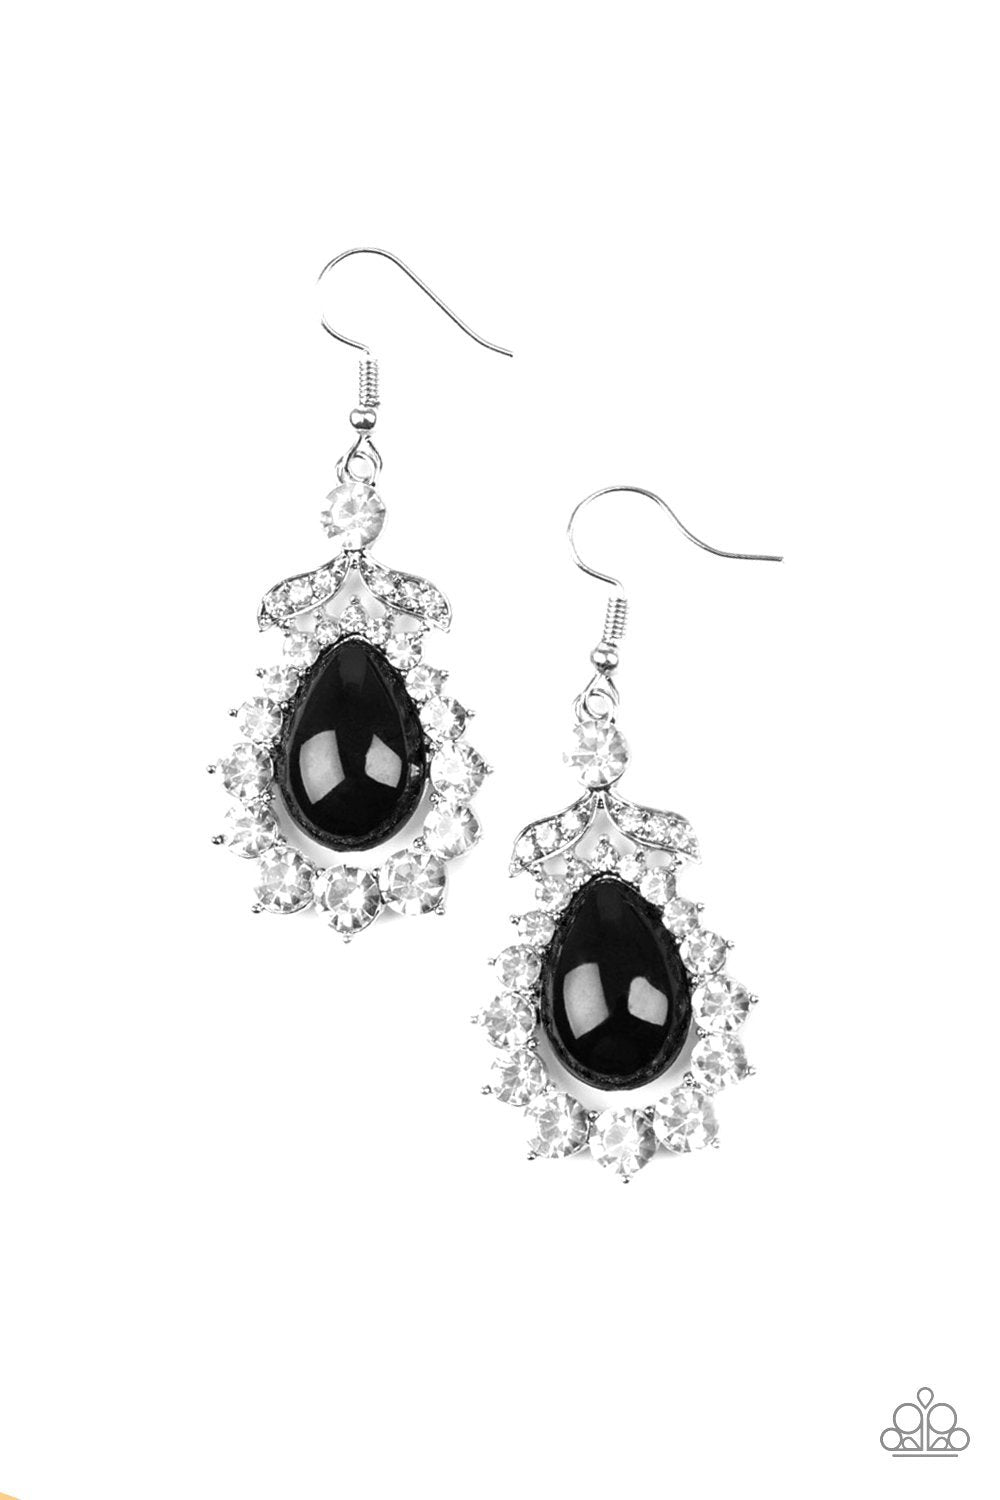 Award Winning Shimmer Black and White Rhinestone Earrings - Paparazzi Accessories - lightbox -CarasShop.com - $5 Jewelry by Cara Jewels